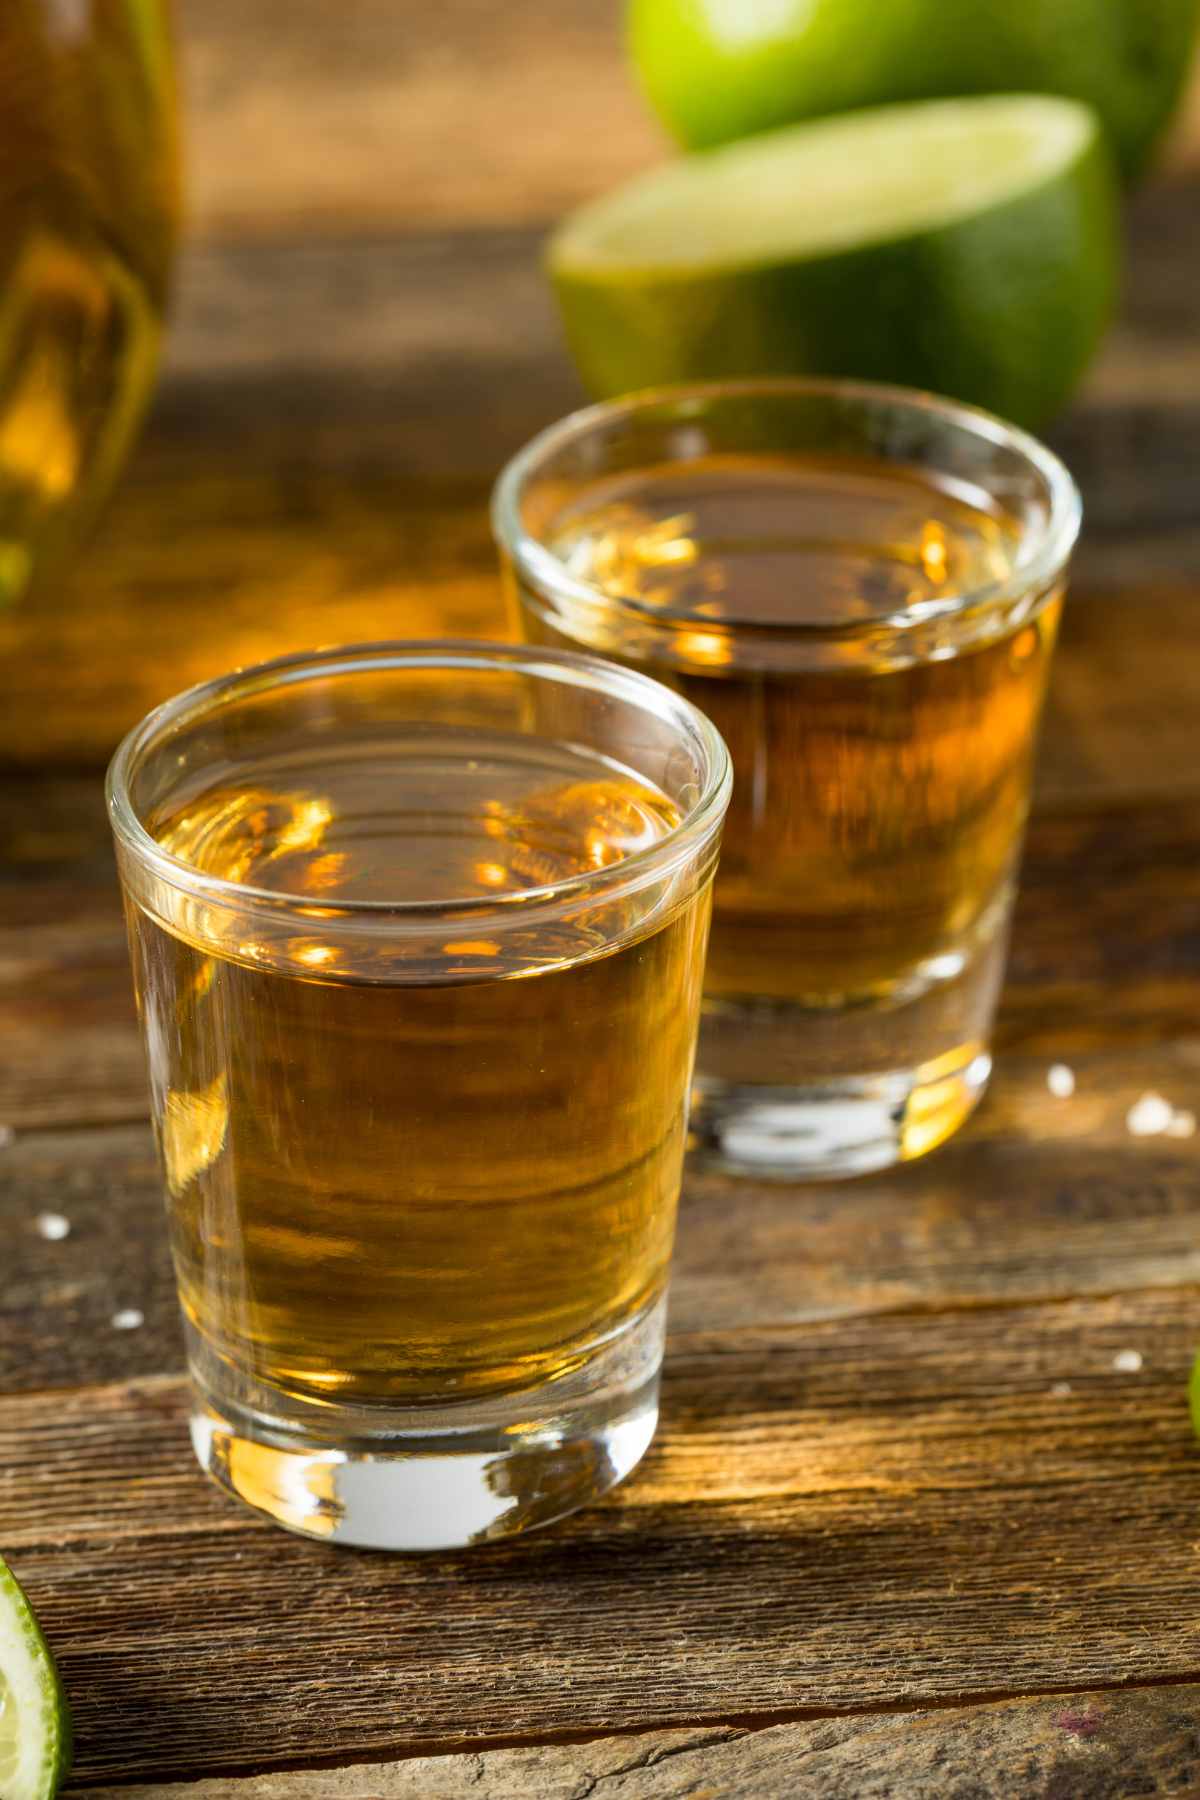 Is Tequila Keto? You may want to have a drink to celebrate a certain occasion while on a keto diet. If you’re thinking of a tequila drink, you may wonder: are you allowed to indulge? Fortunately, you can, in moderation.